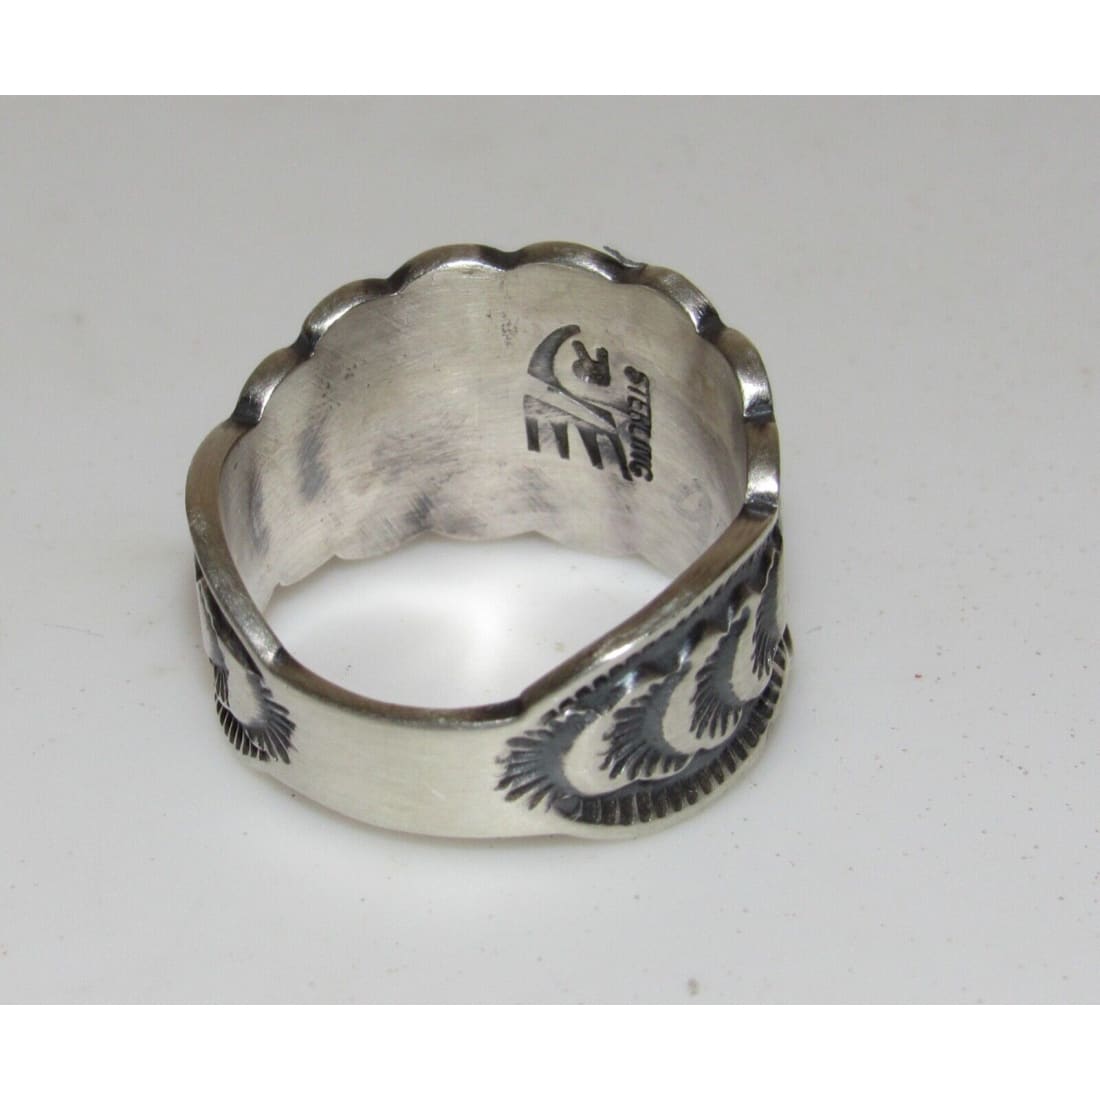 Navajo Band Ring Size 8.5 Sterling Silver Repousse Band